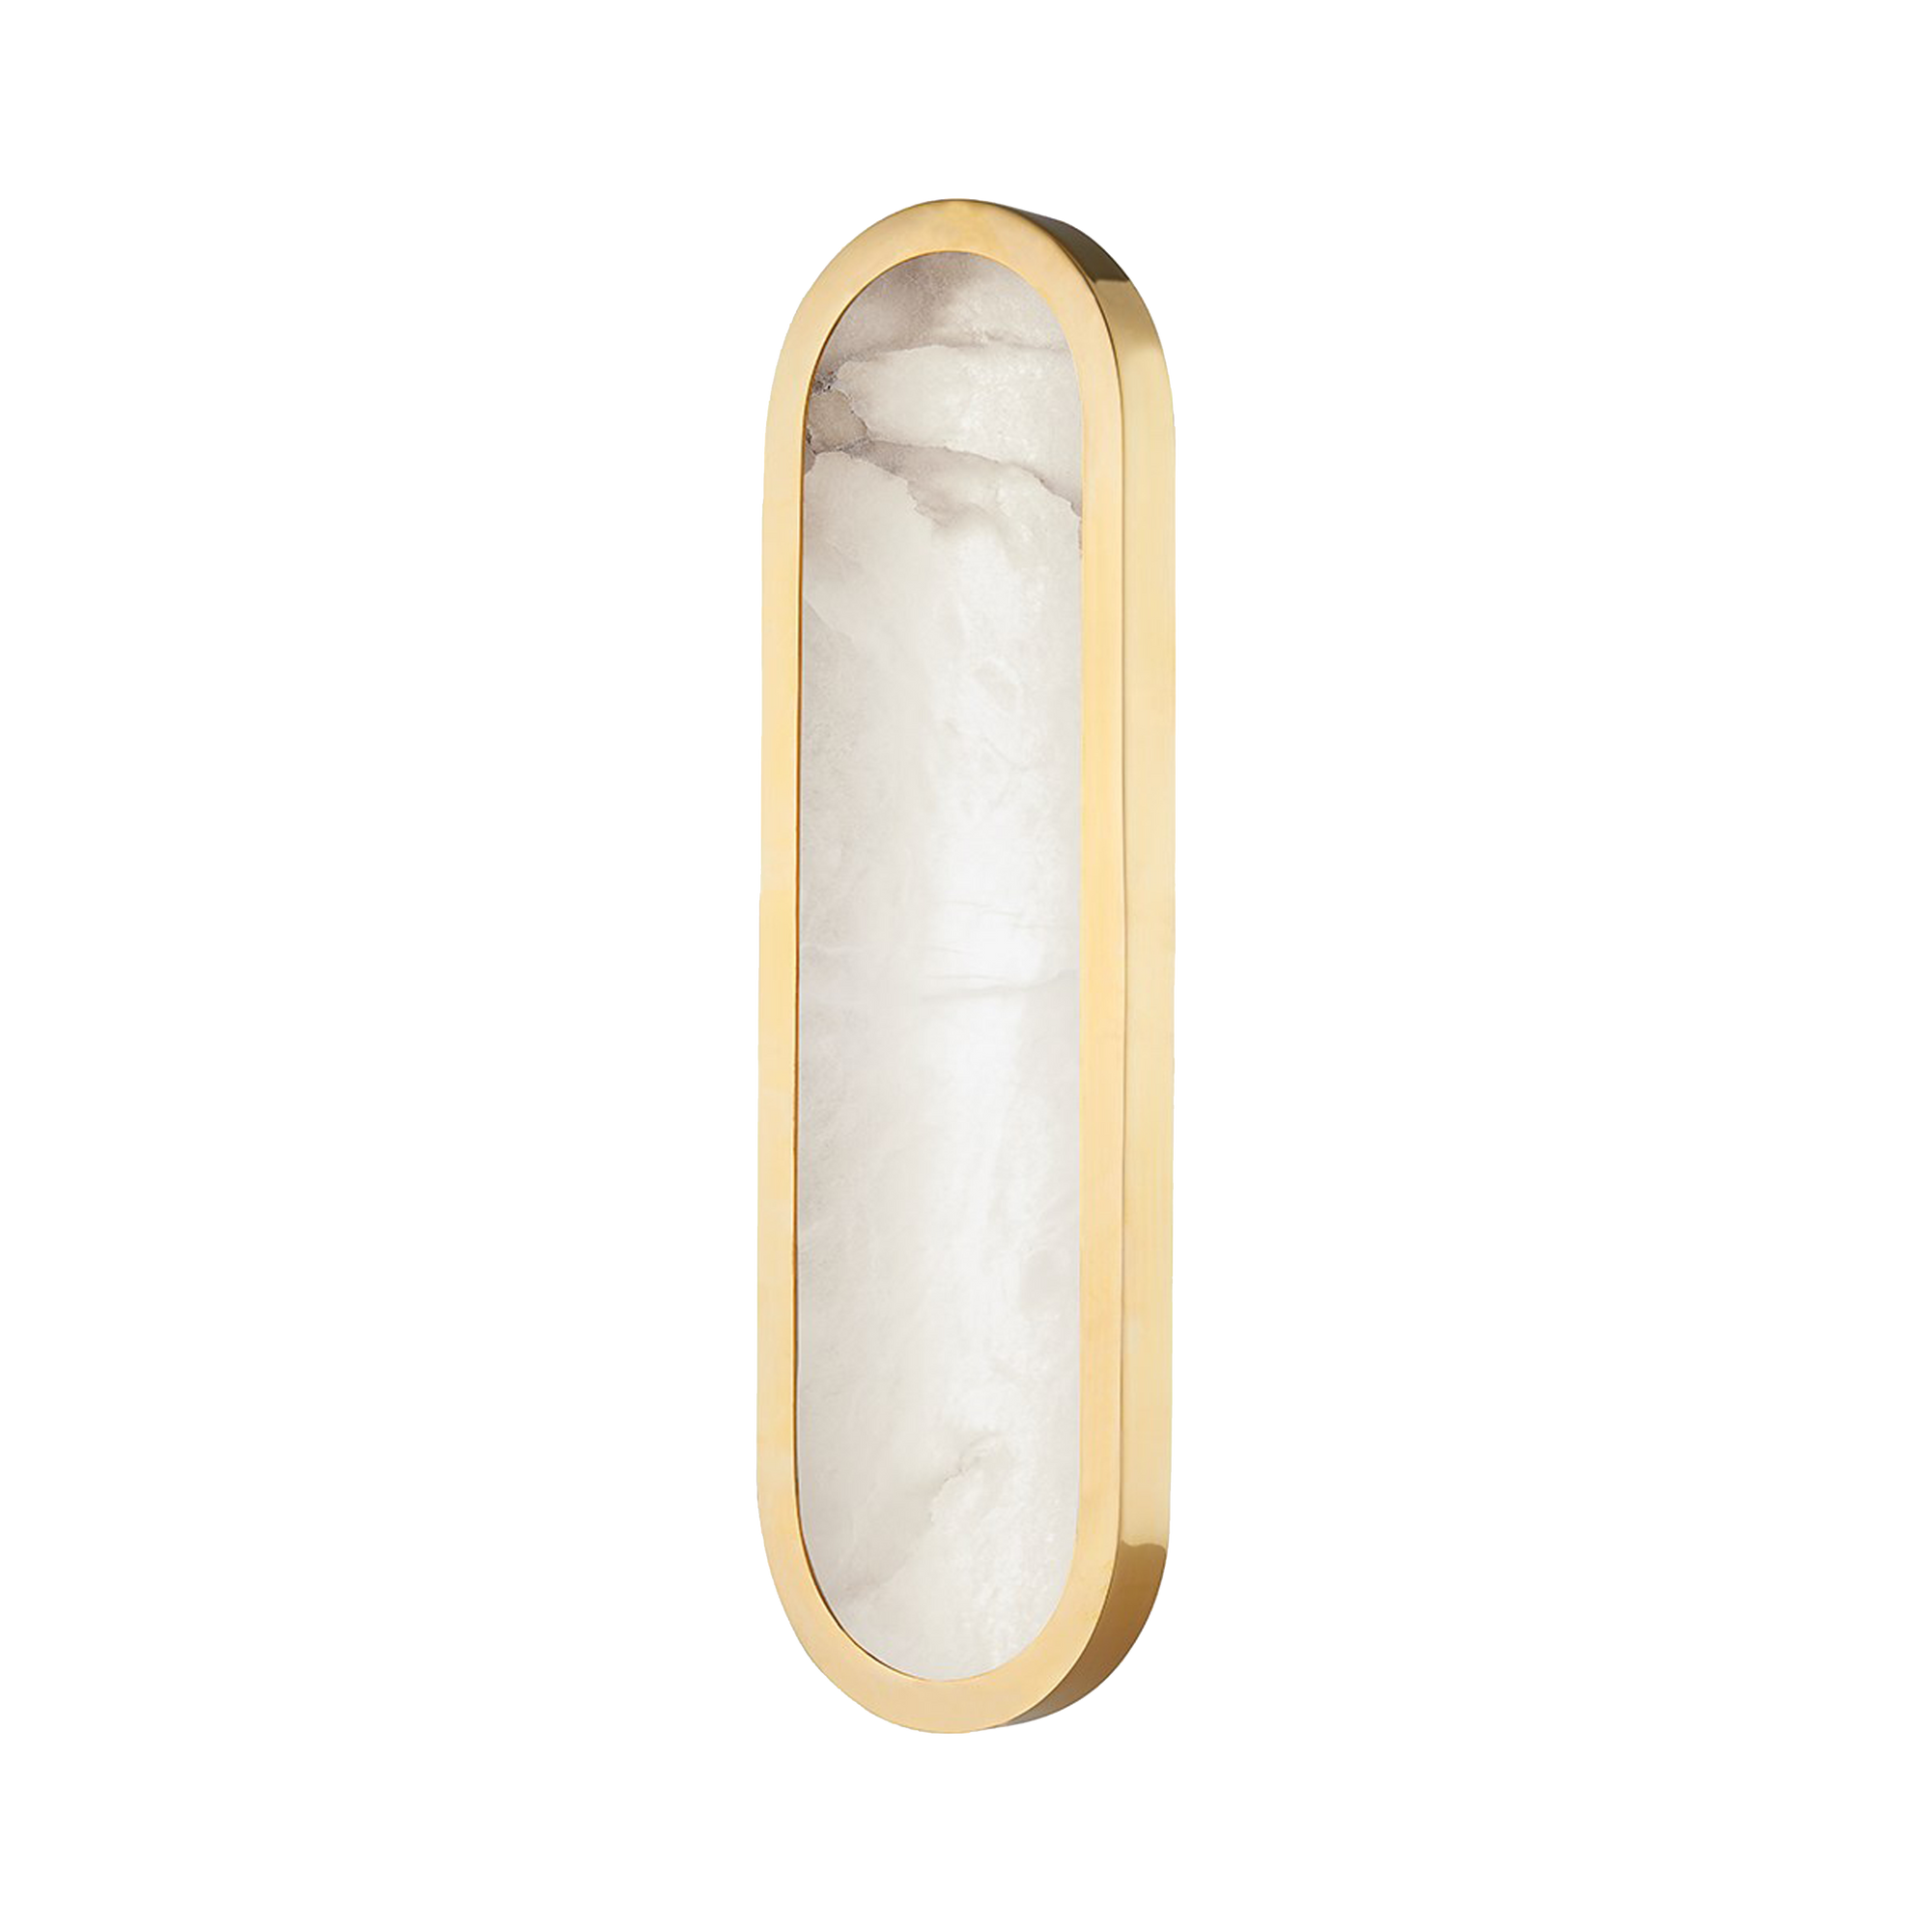 An oval of the finest Spanish alabaster wrapped in a racetrack-shaped frame makes for a winning combination.